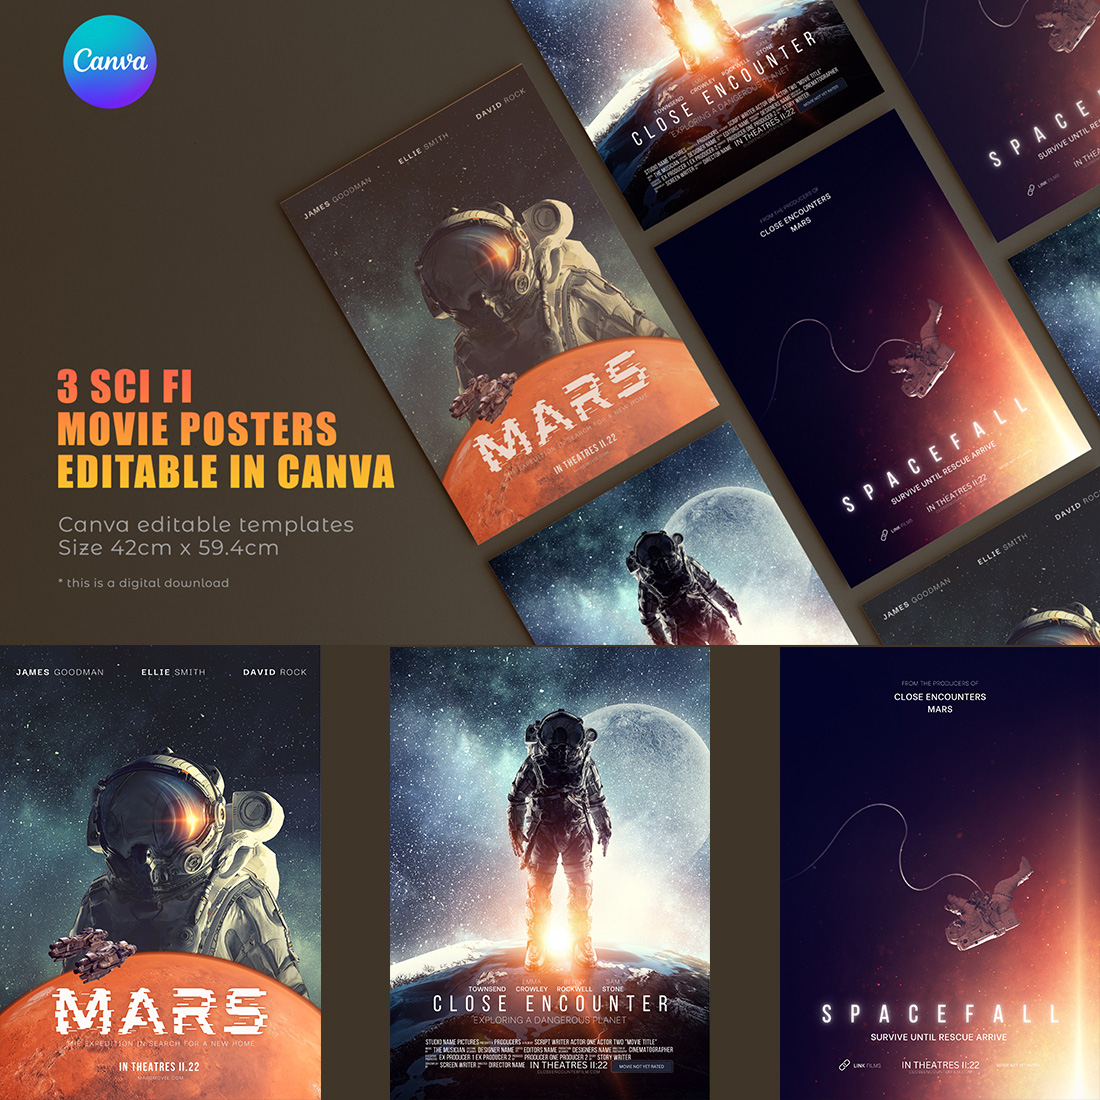 Canva Editable Poster Templates cover image.